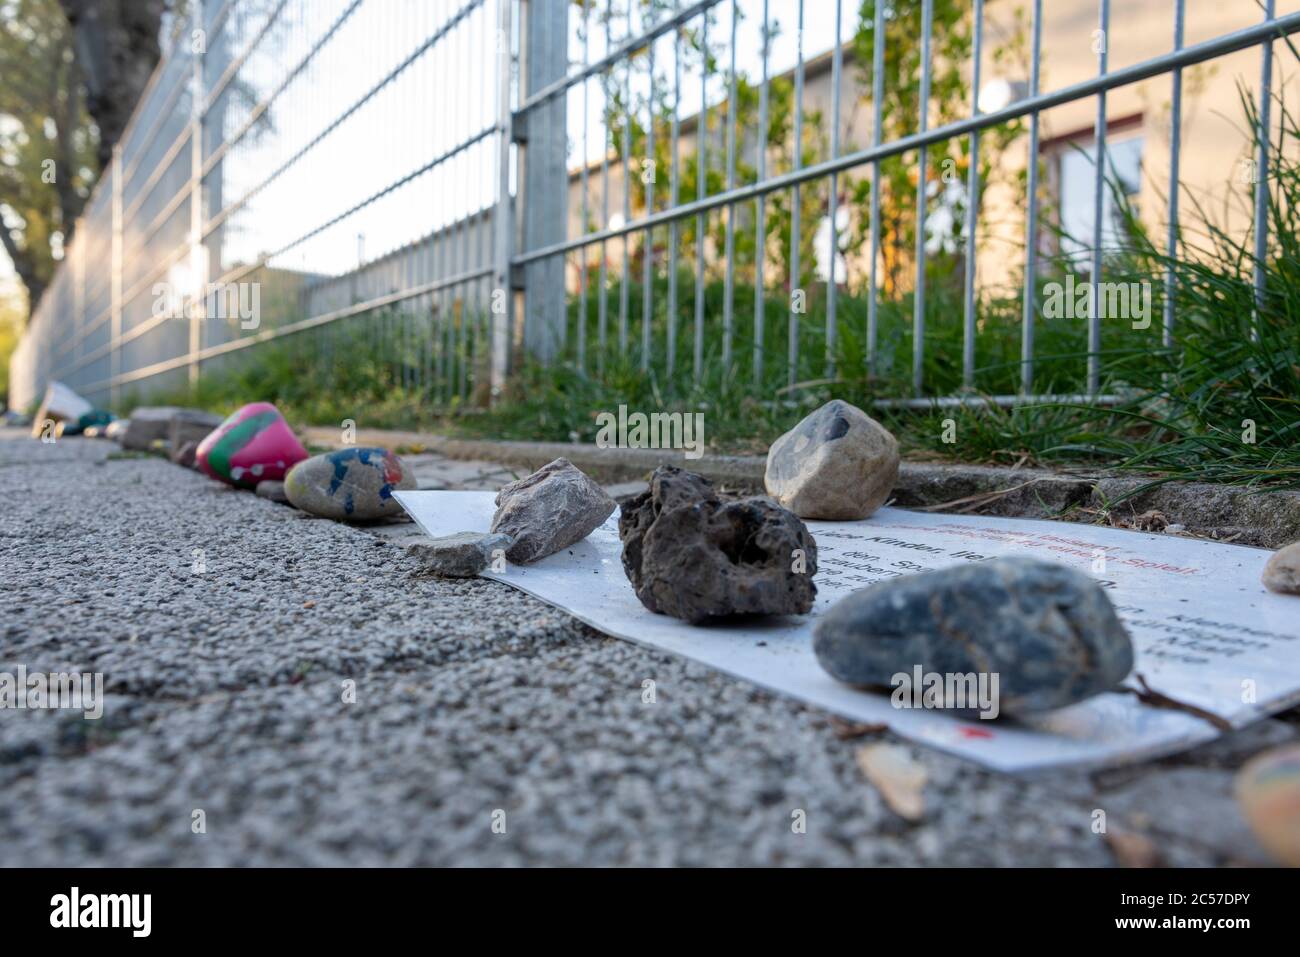 Germany, Saxony-Anhalt, Magdeburg: Colorful stones lie in front of the Pinocchio daycare center. They symbolize hope and joy in difficult times. Such Stock Photo